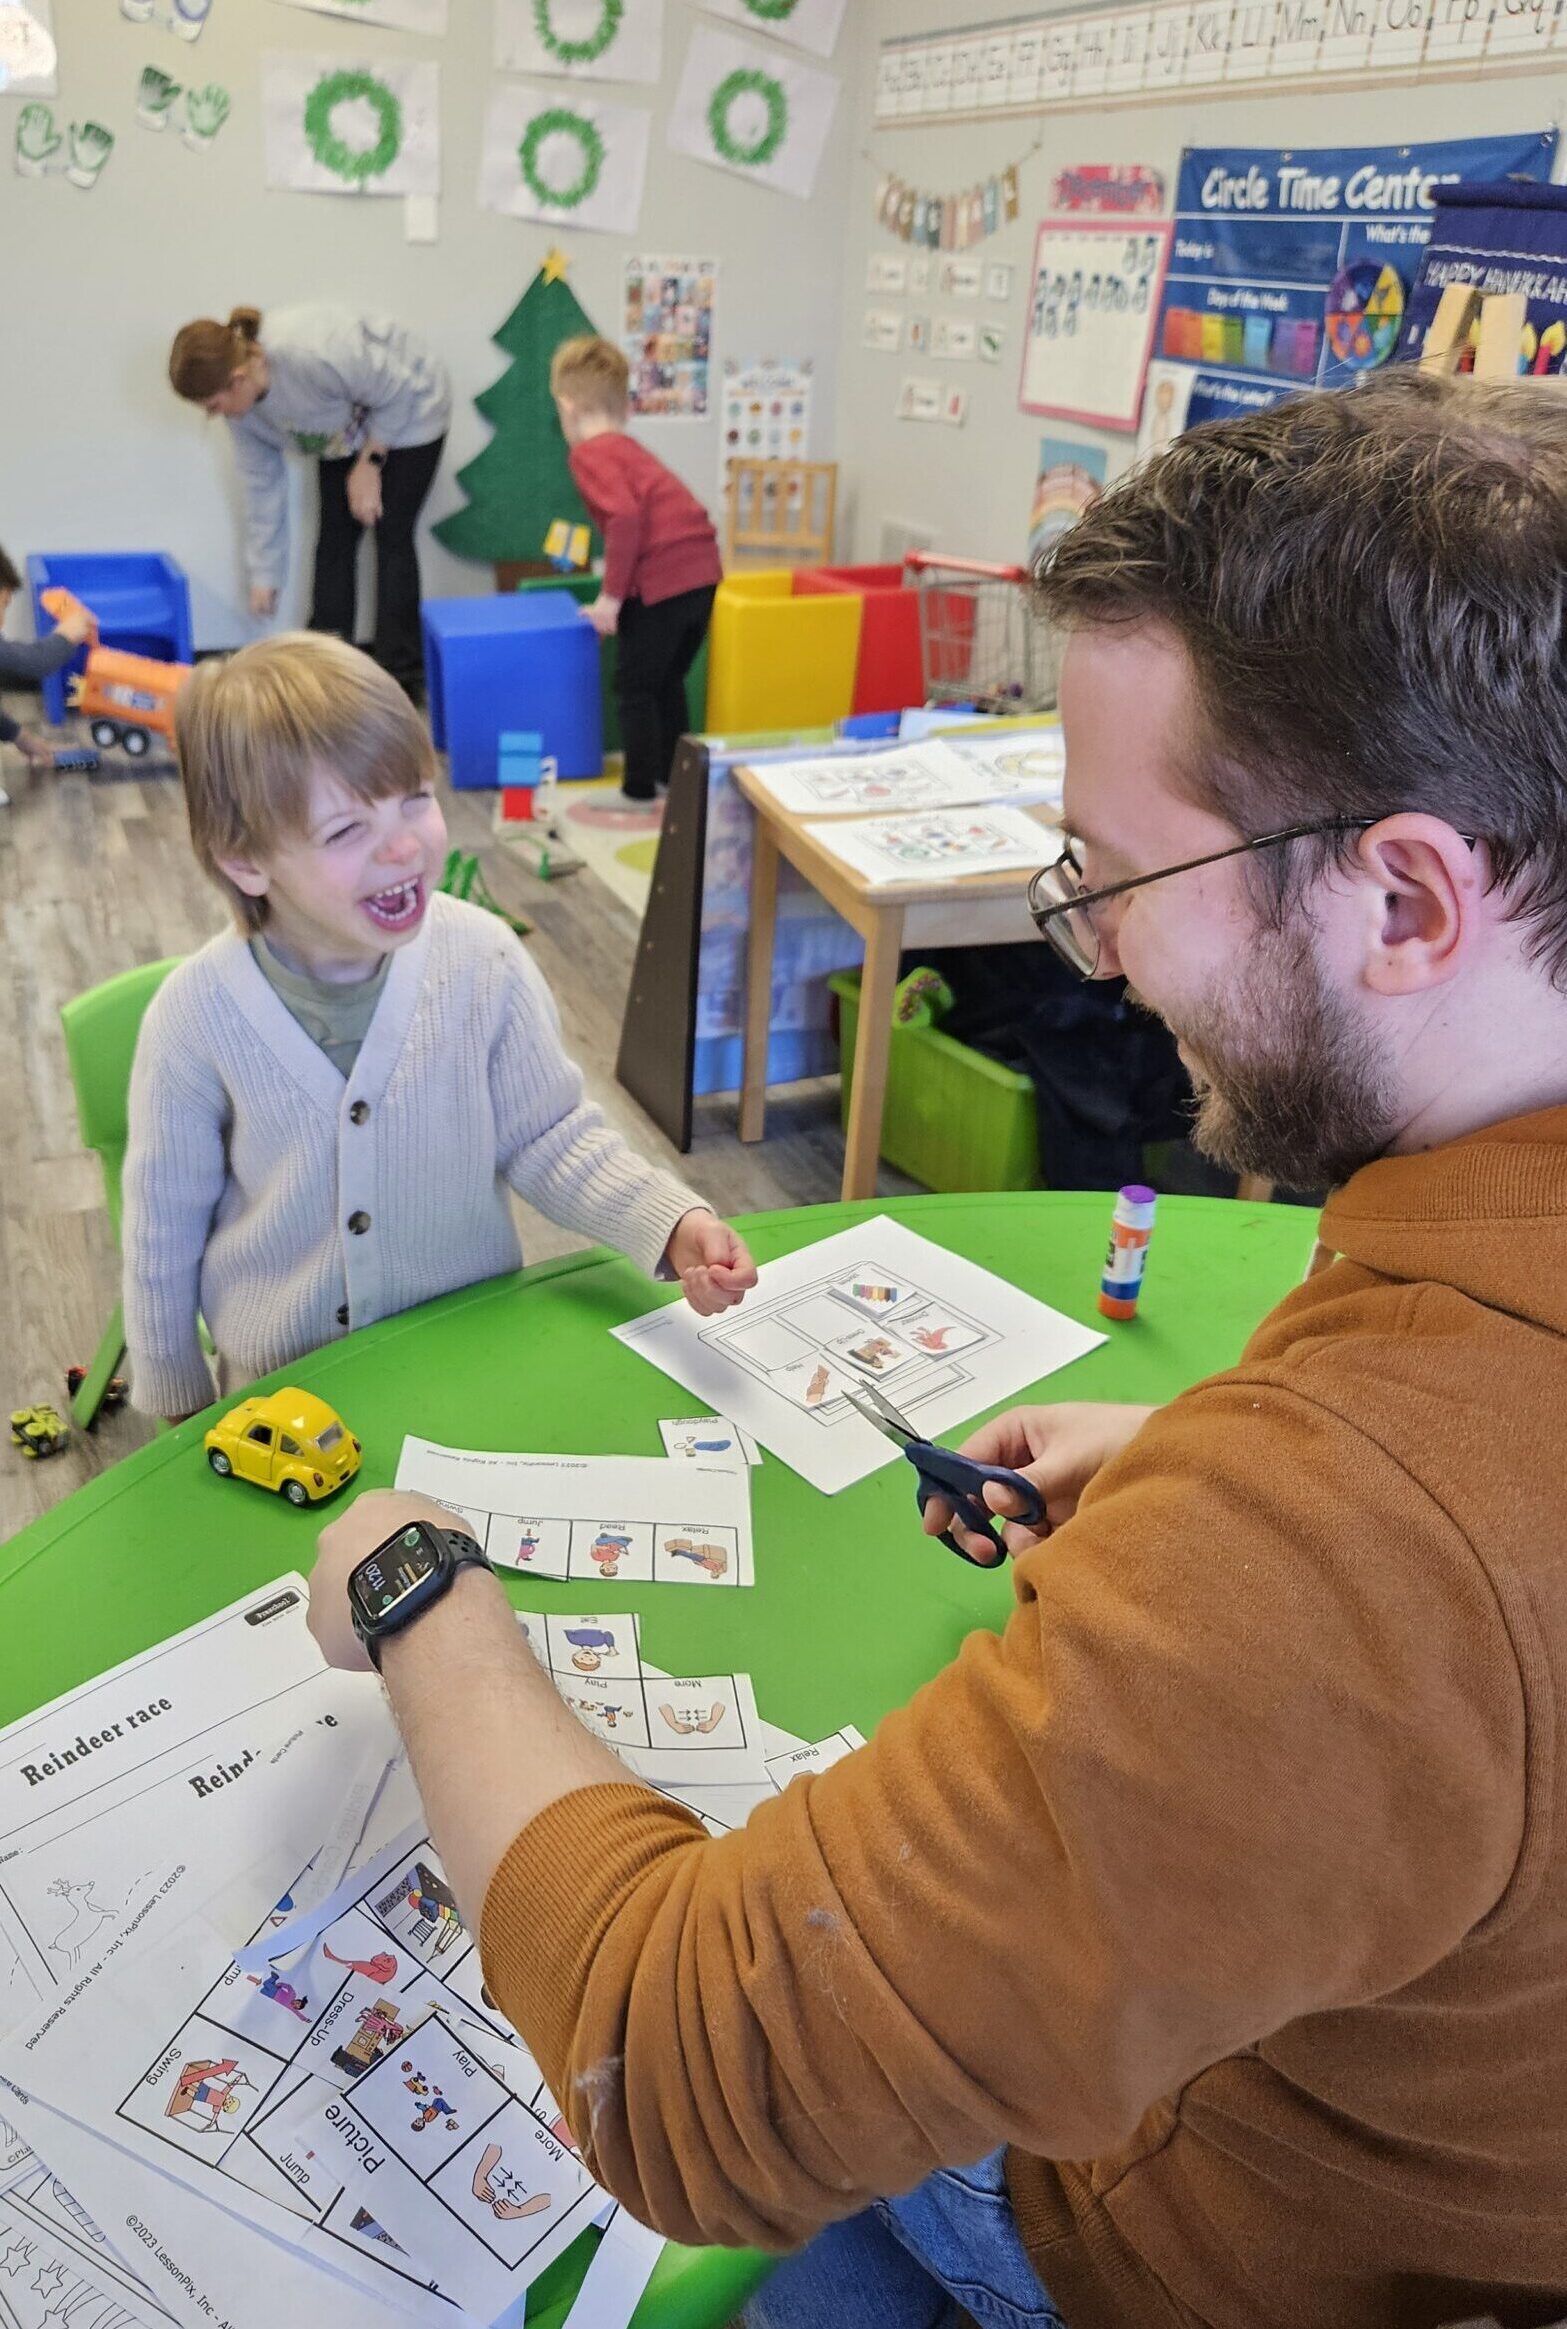 A child smiles happily at a therapist in a preschool setting, engaged in a speech-related activity within Step Forward Therapy's developmental preschool program.